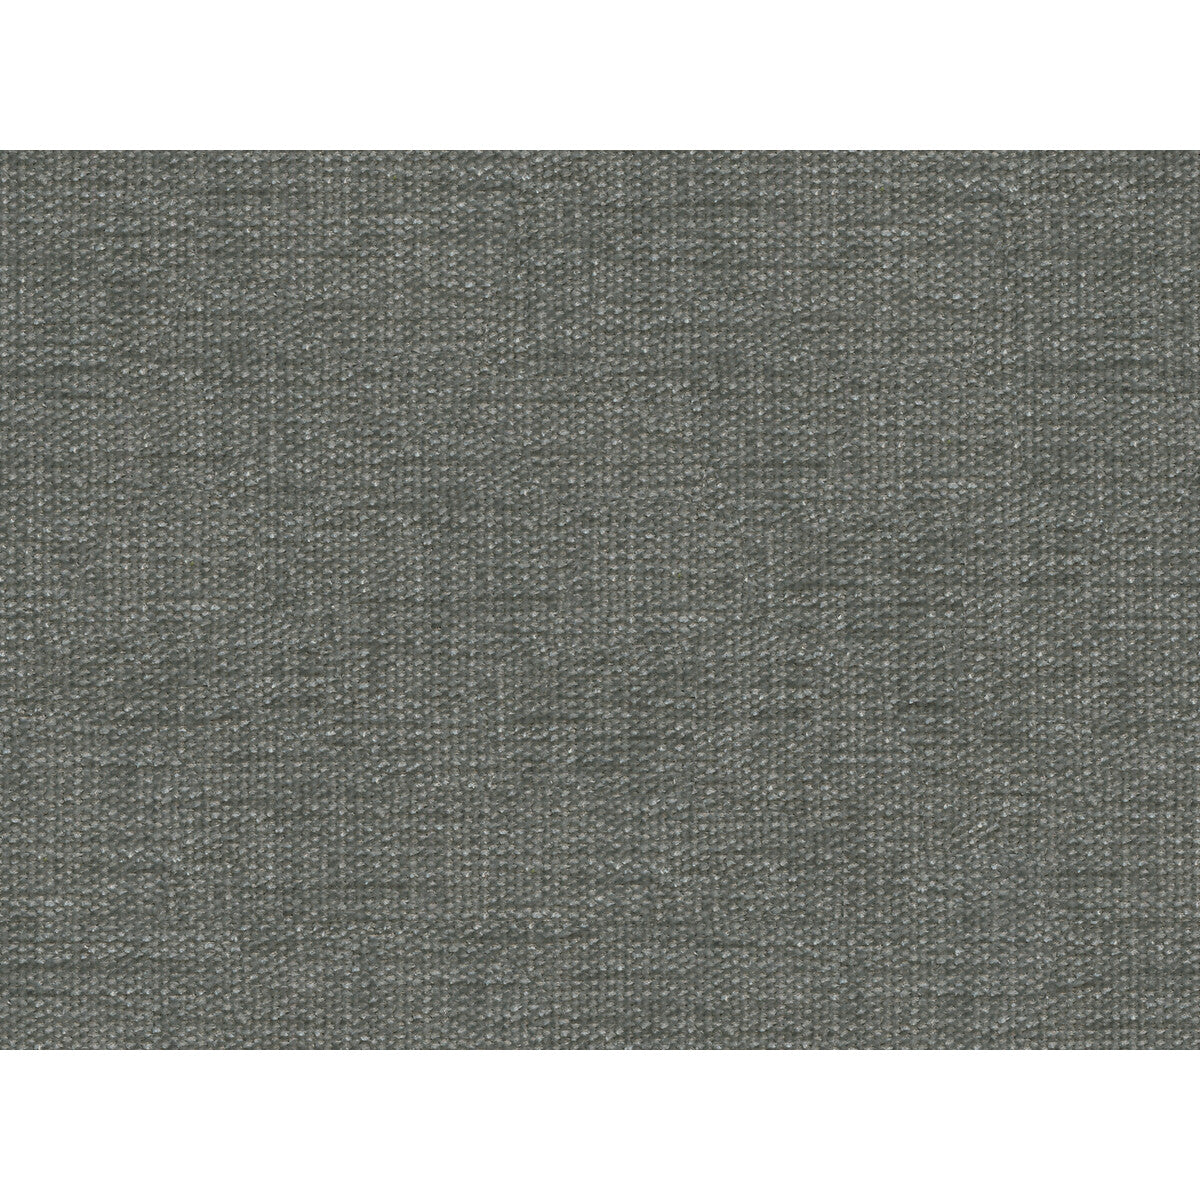 Kravet Contract fabric in 34961-11 color - pattern 34961.11.0 - by Kravet Contract in the Performance Kravetarmor collection